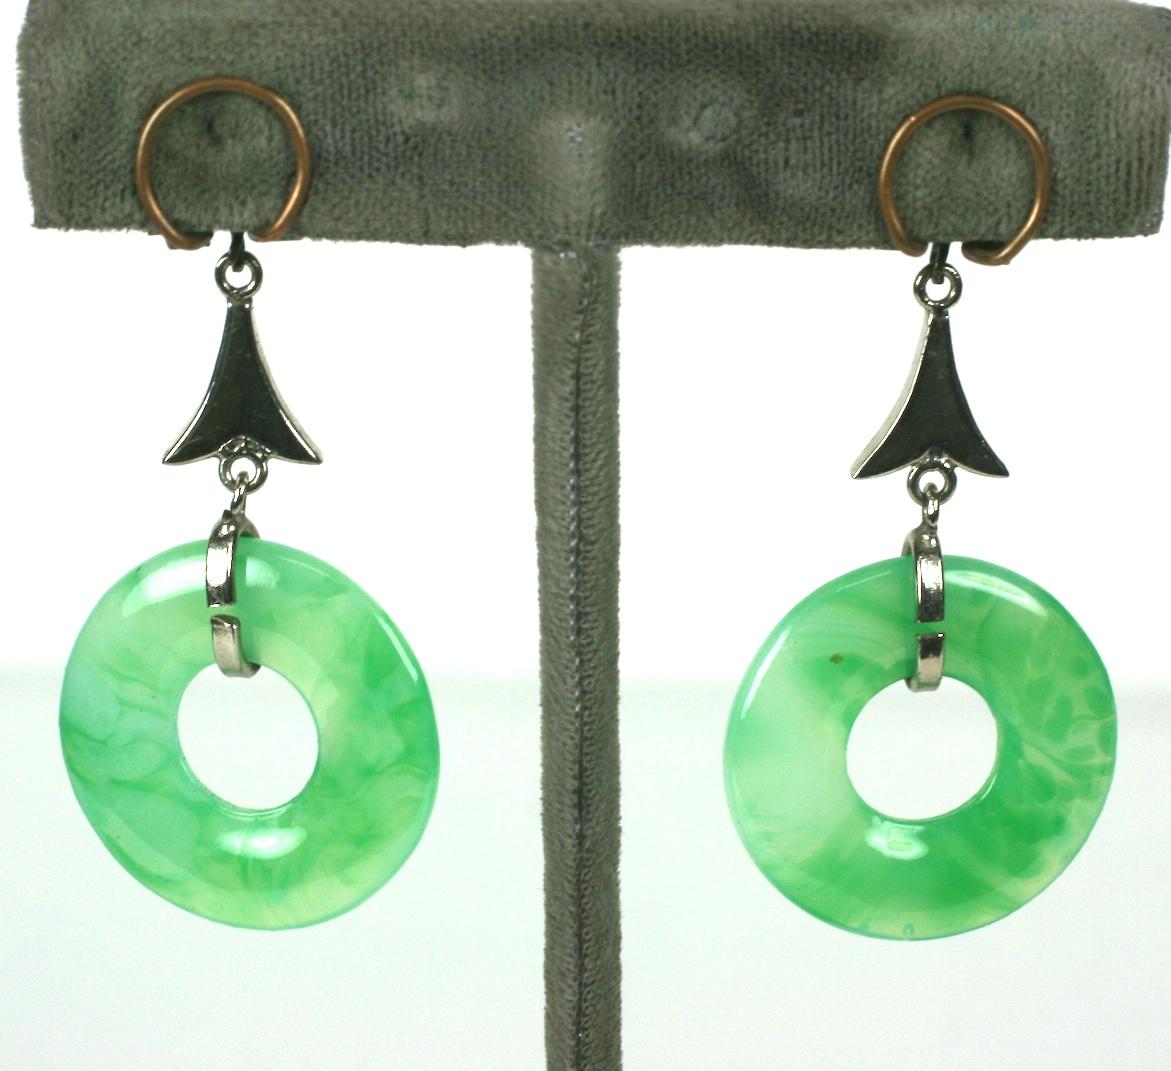 French Art Deco Chinoiserie faux jade pate de verre drop ear clips. Composed of flat round glass rings, cabochons  and triangular marcasite stations of rhodium plate metal.
Excellent Condition.  Clip Back Fittings
Marked Made in France Depose
Length